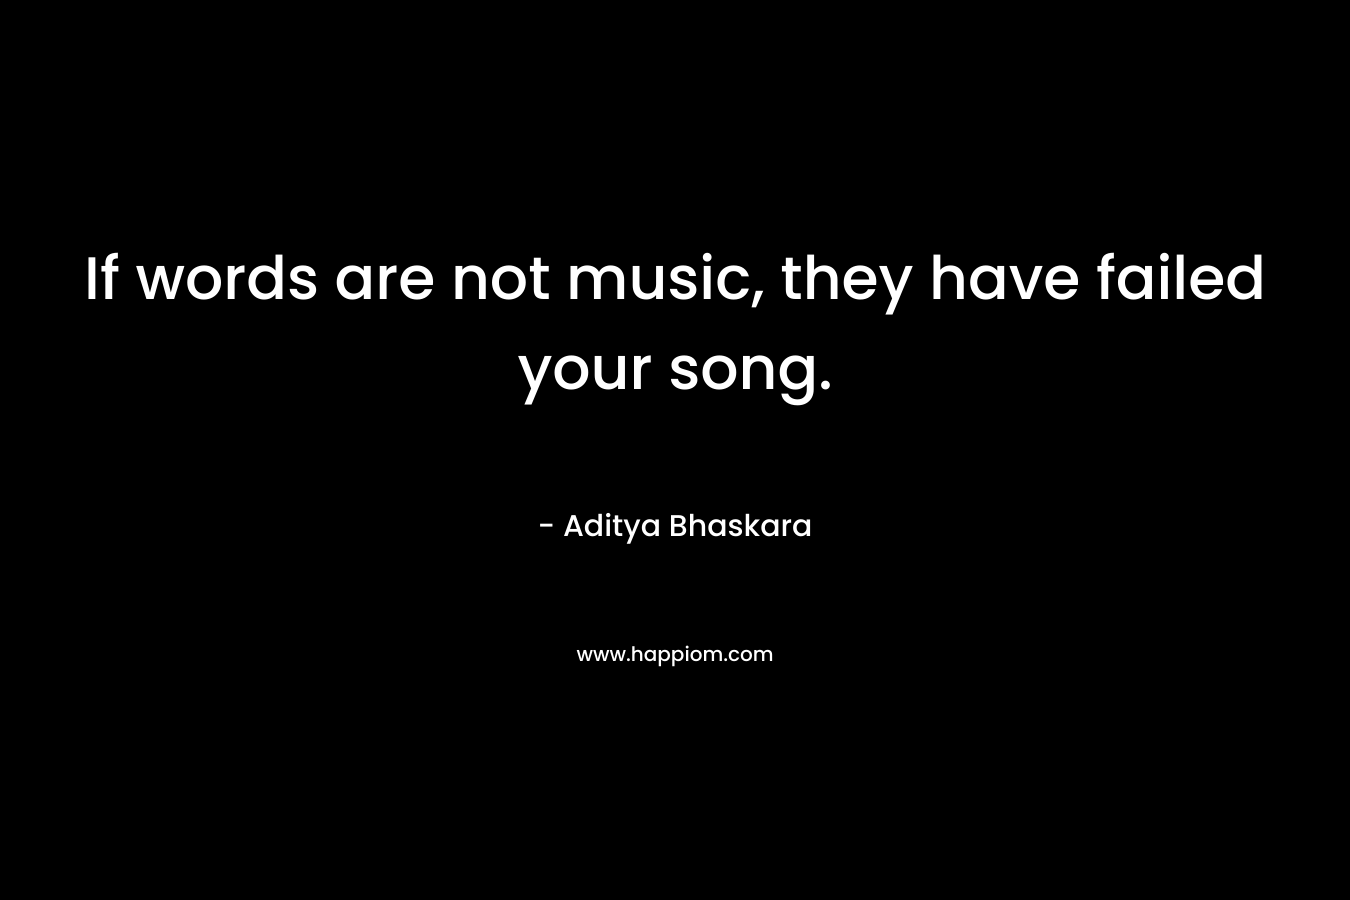 If words are not music, they have failed your song. – Aditya Bhaskara